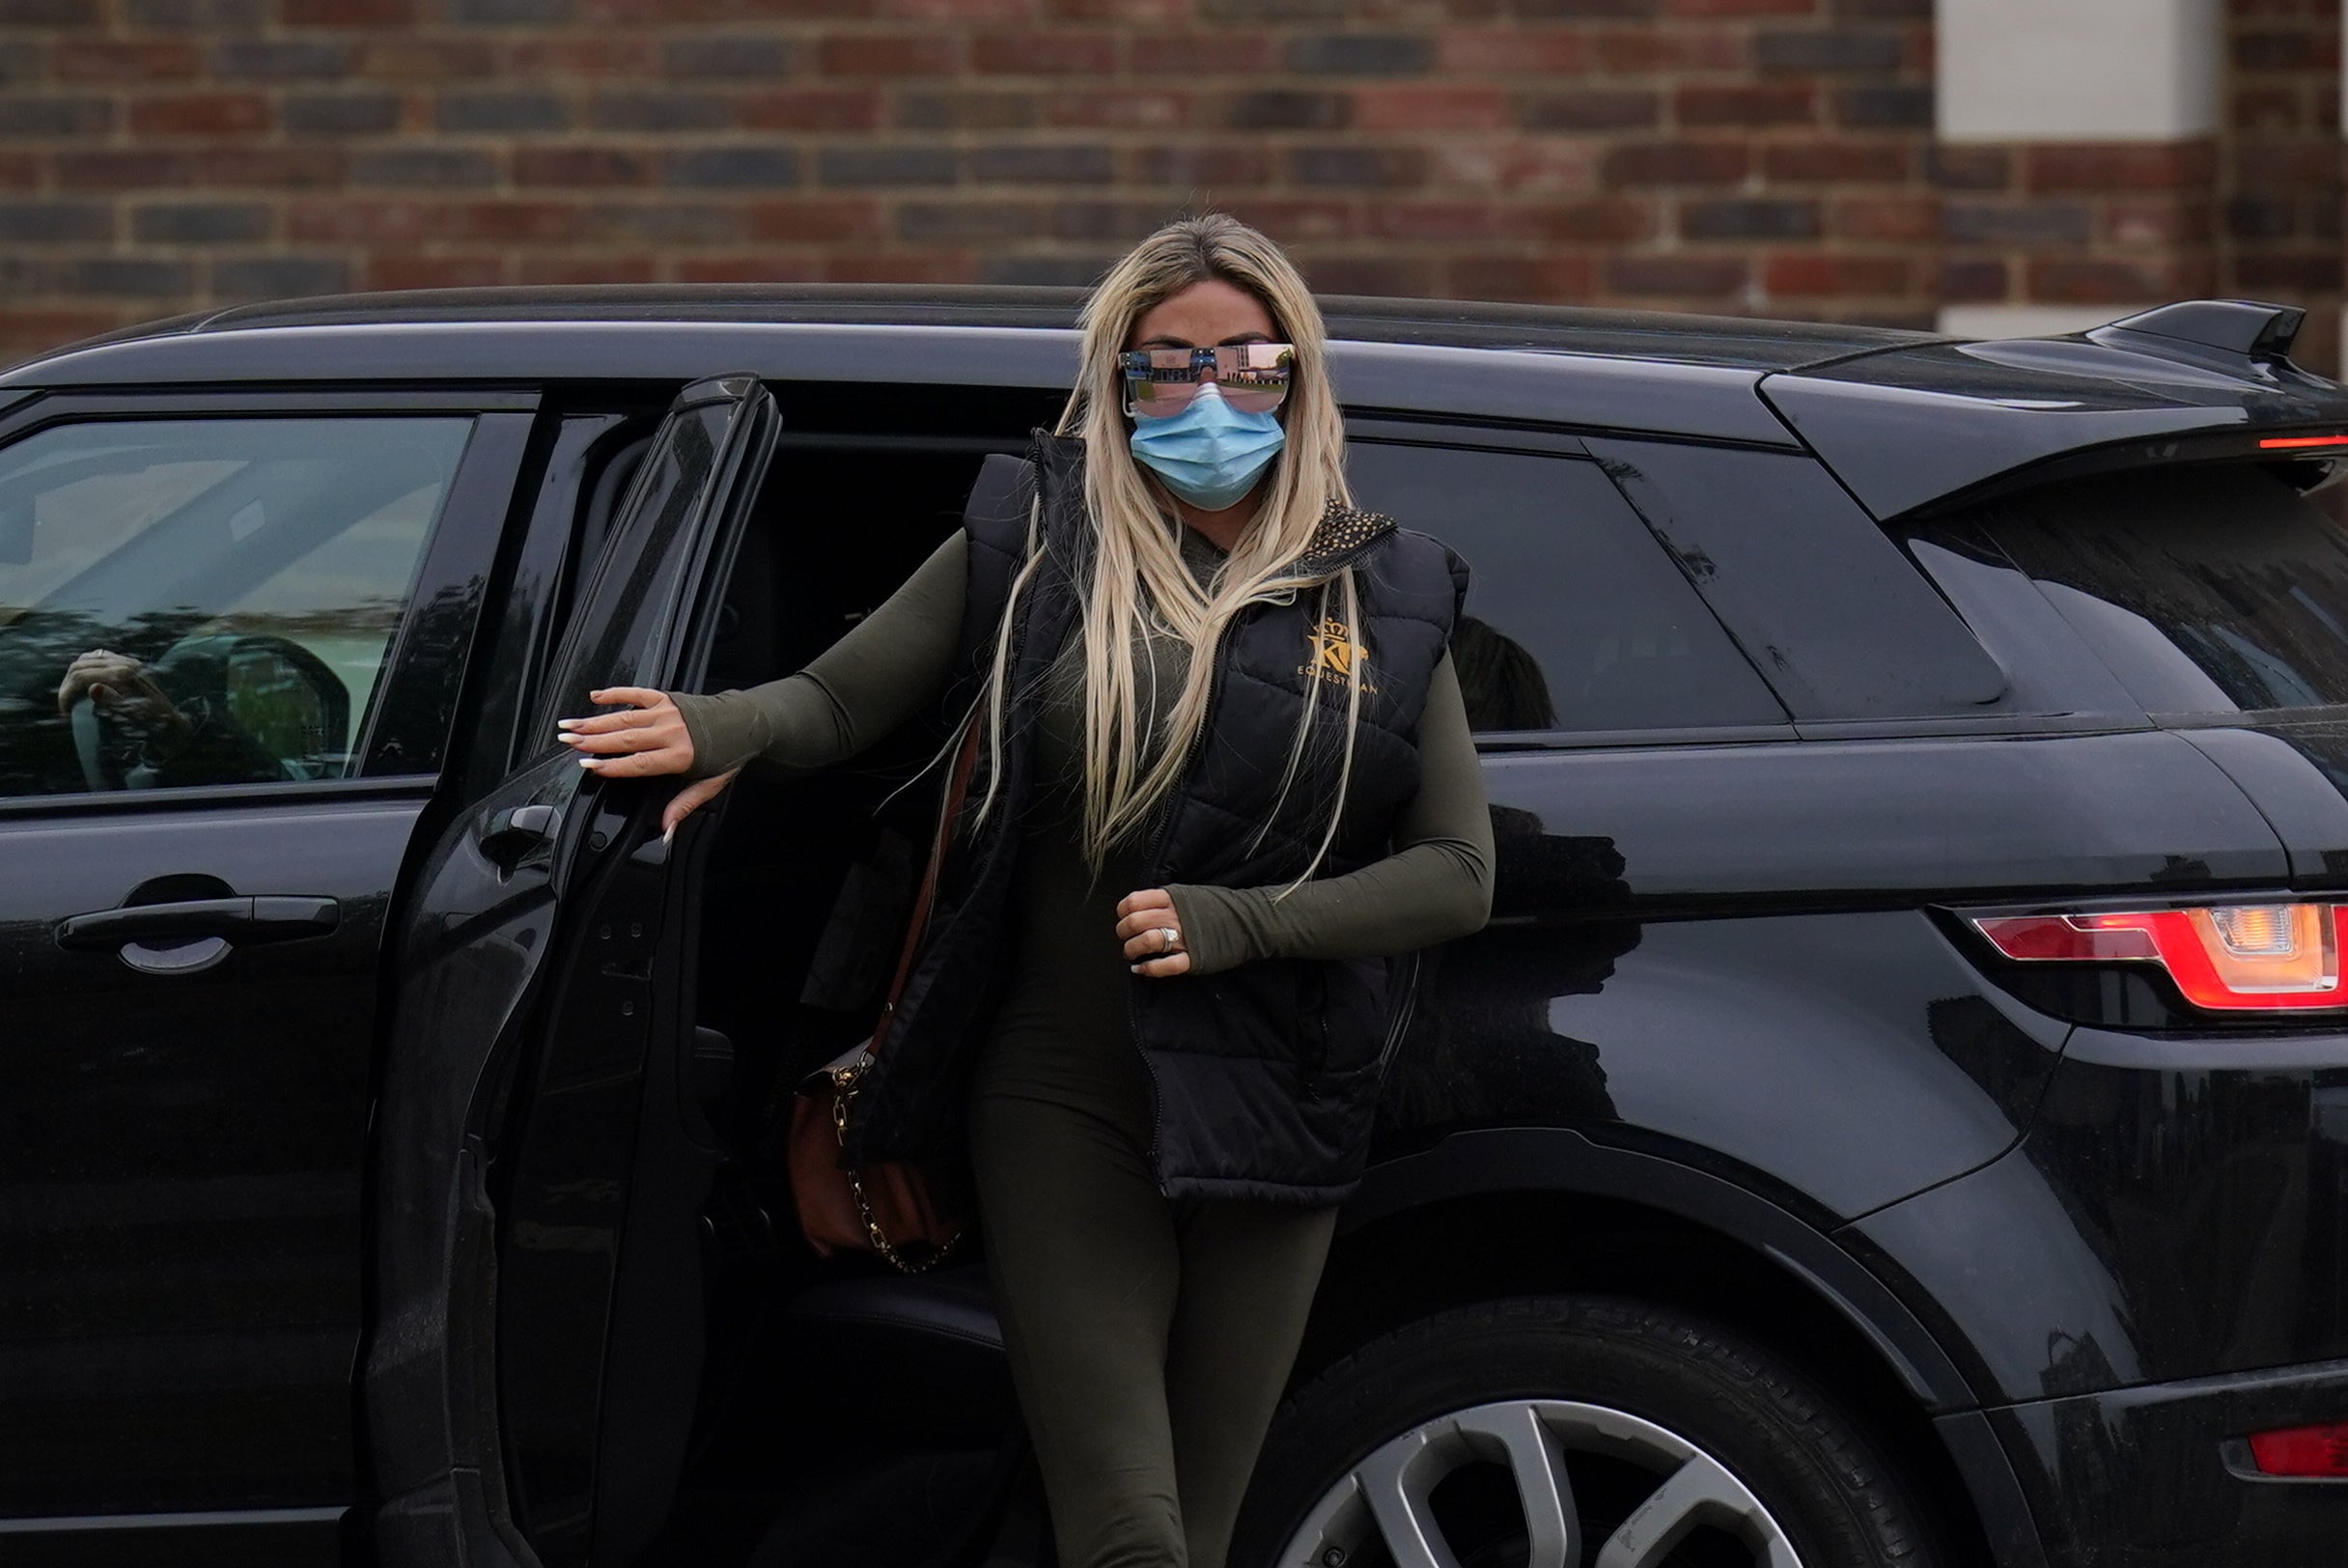 Katie Price has been charged with breaching her restraining order